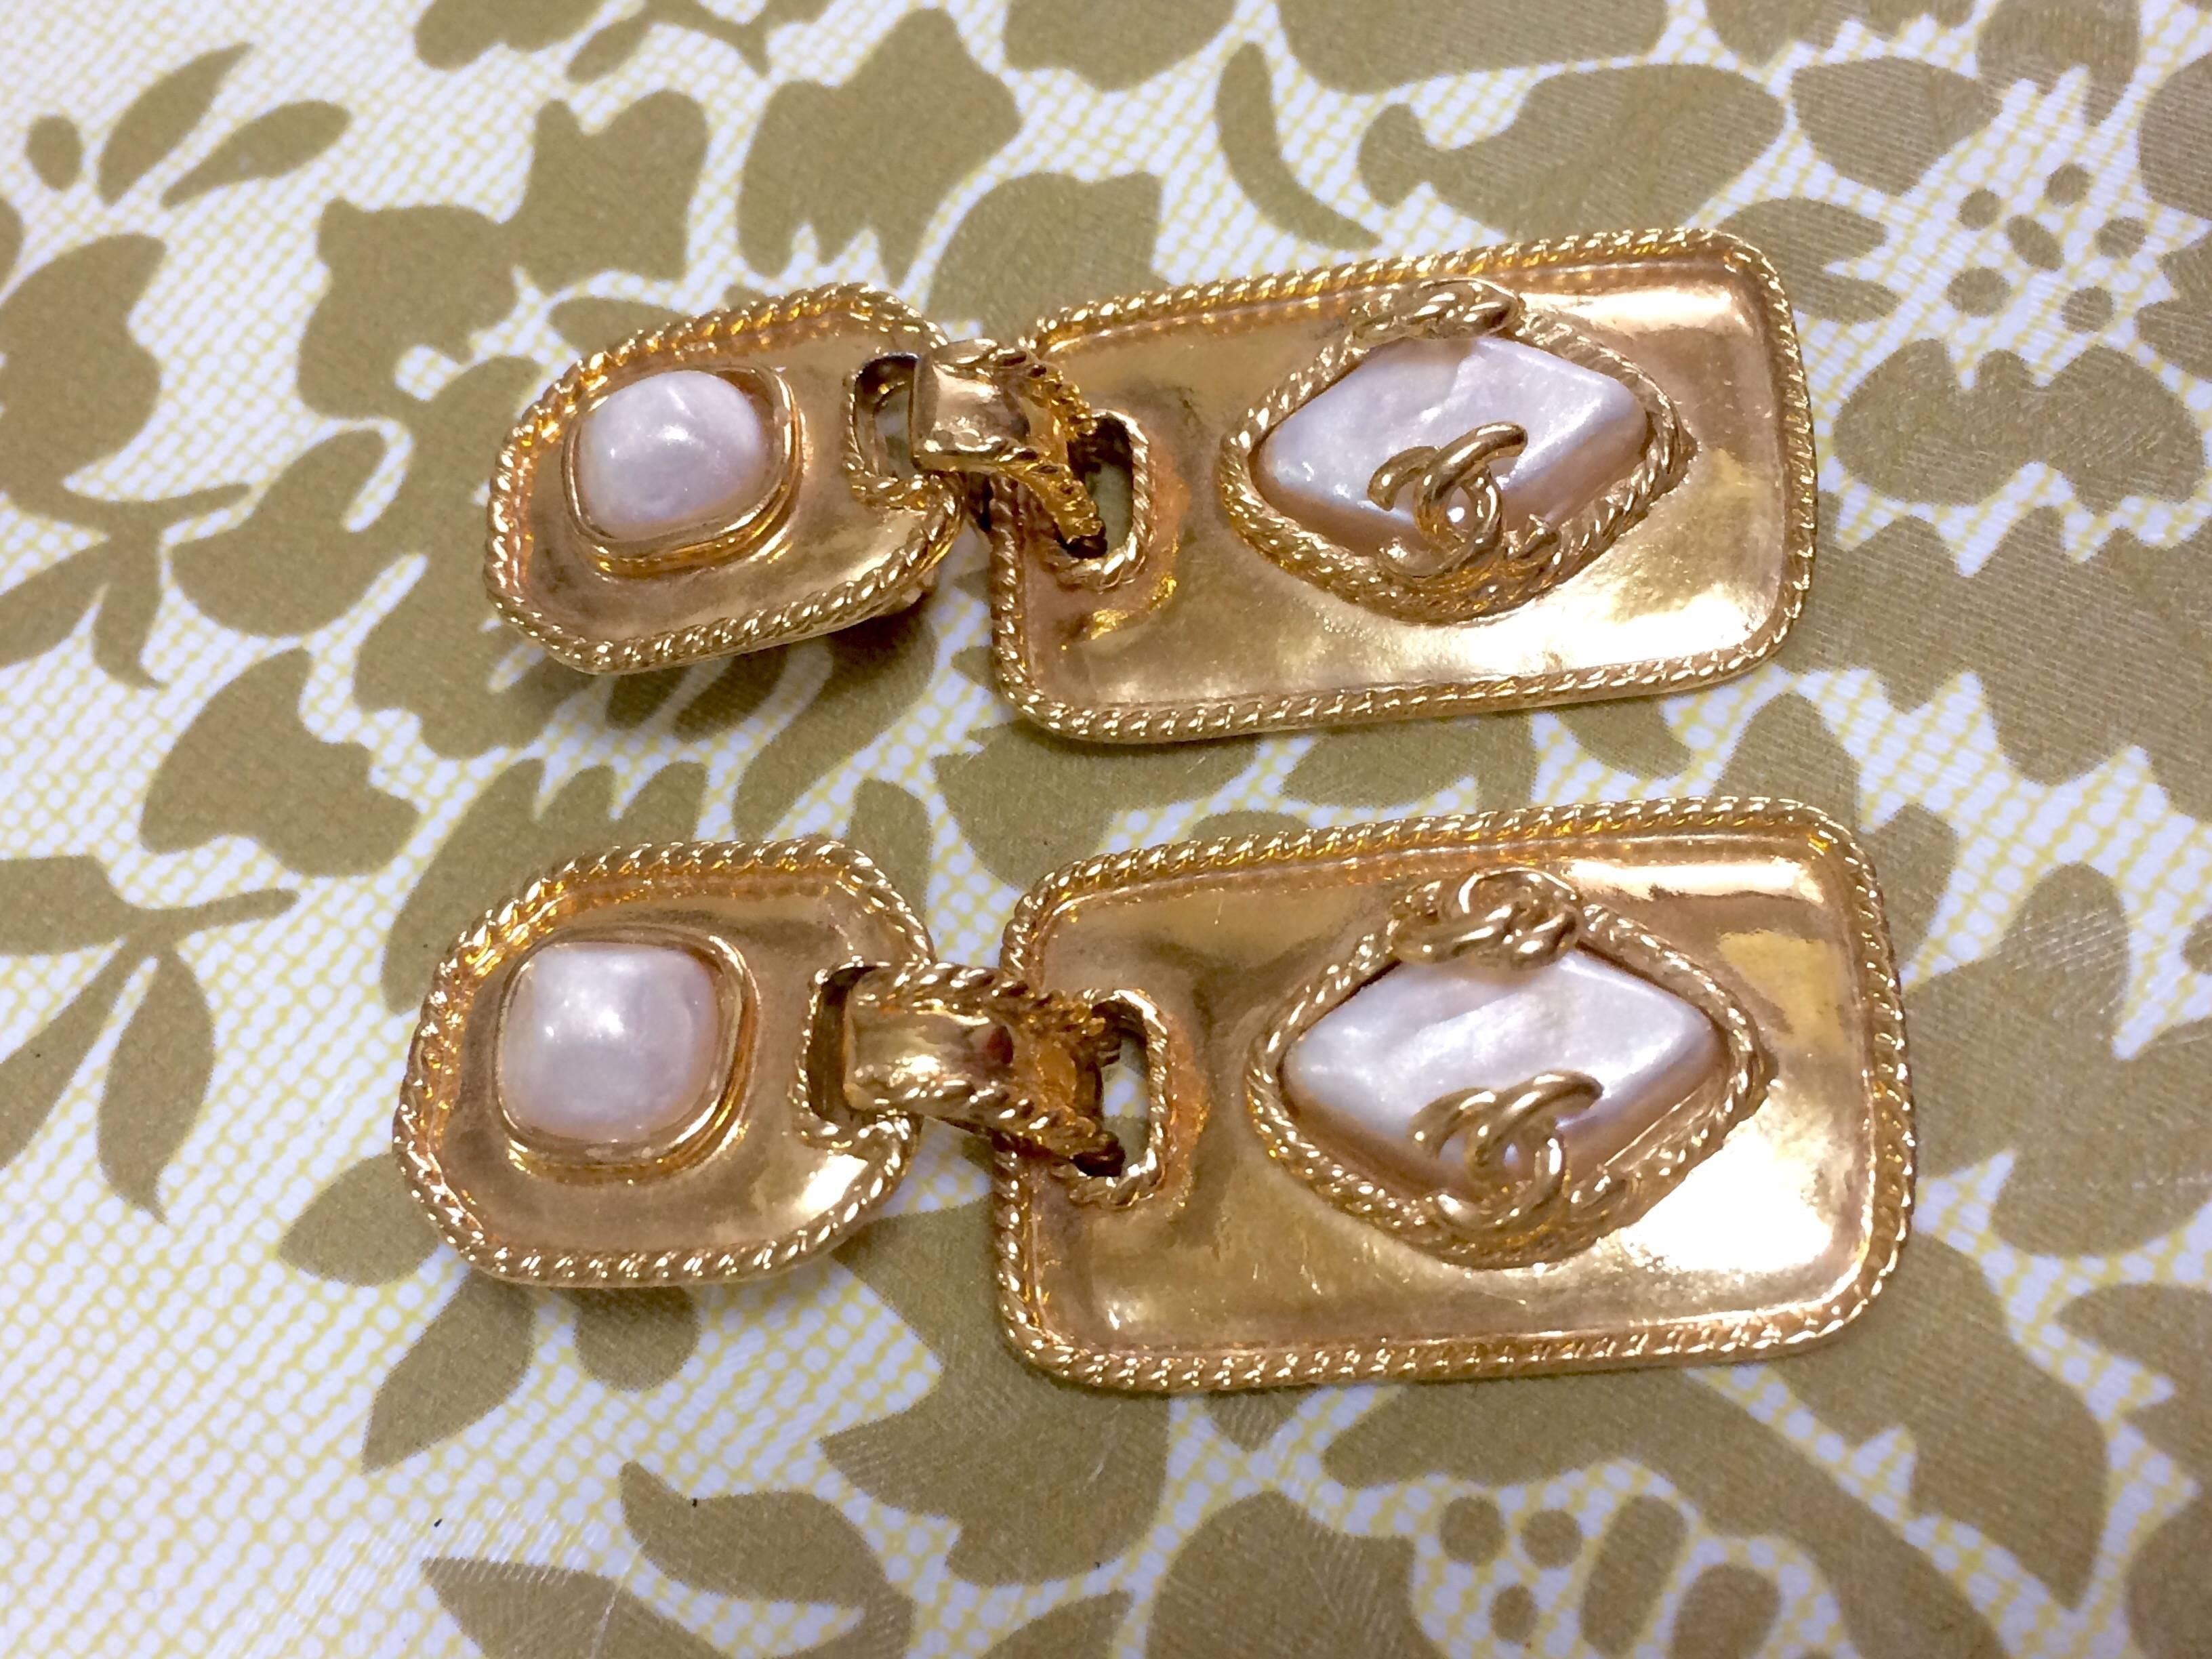 Women's Vintage CHANEL square and rhombus shape dangling earrings, faux pearls and cc. For Sale